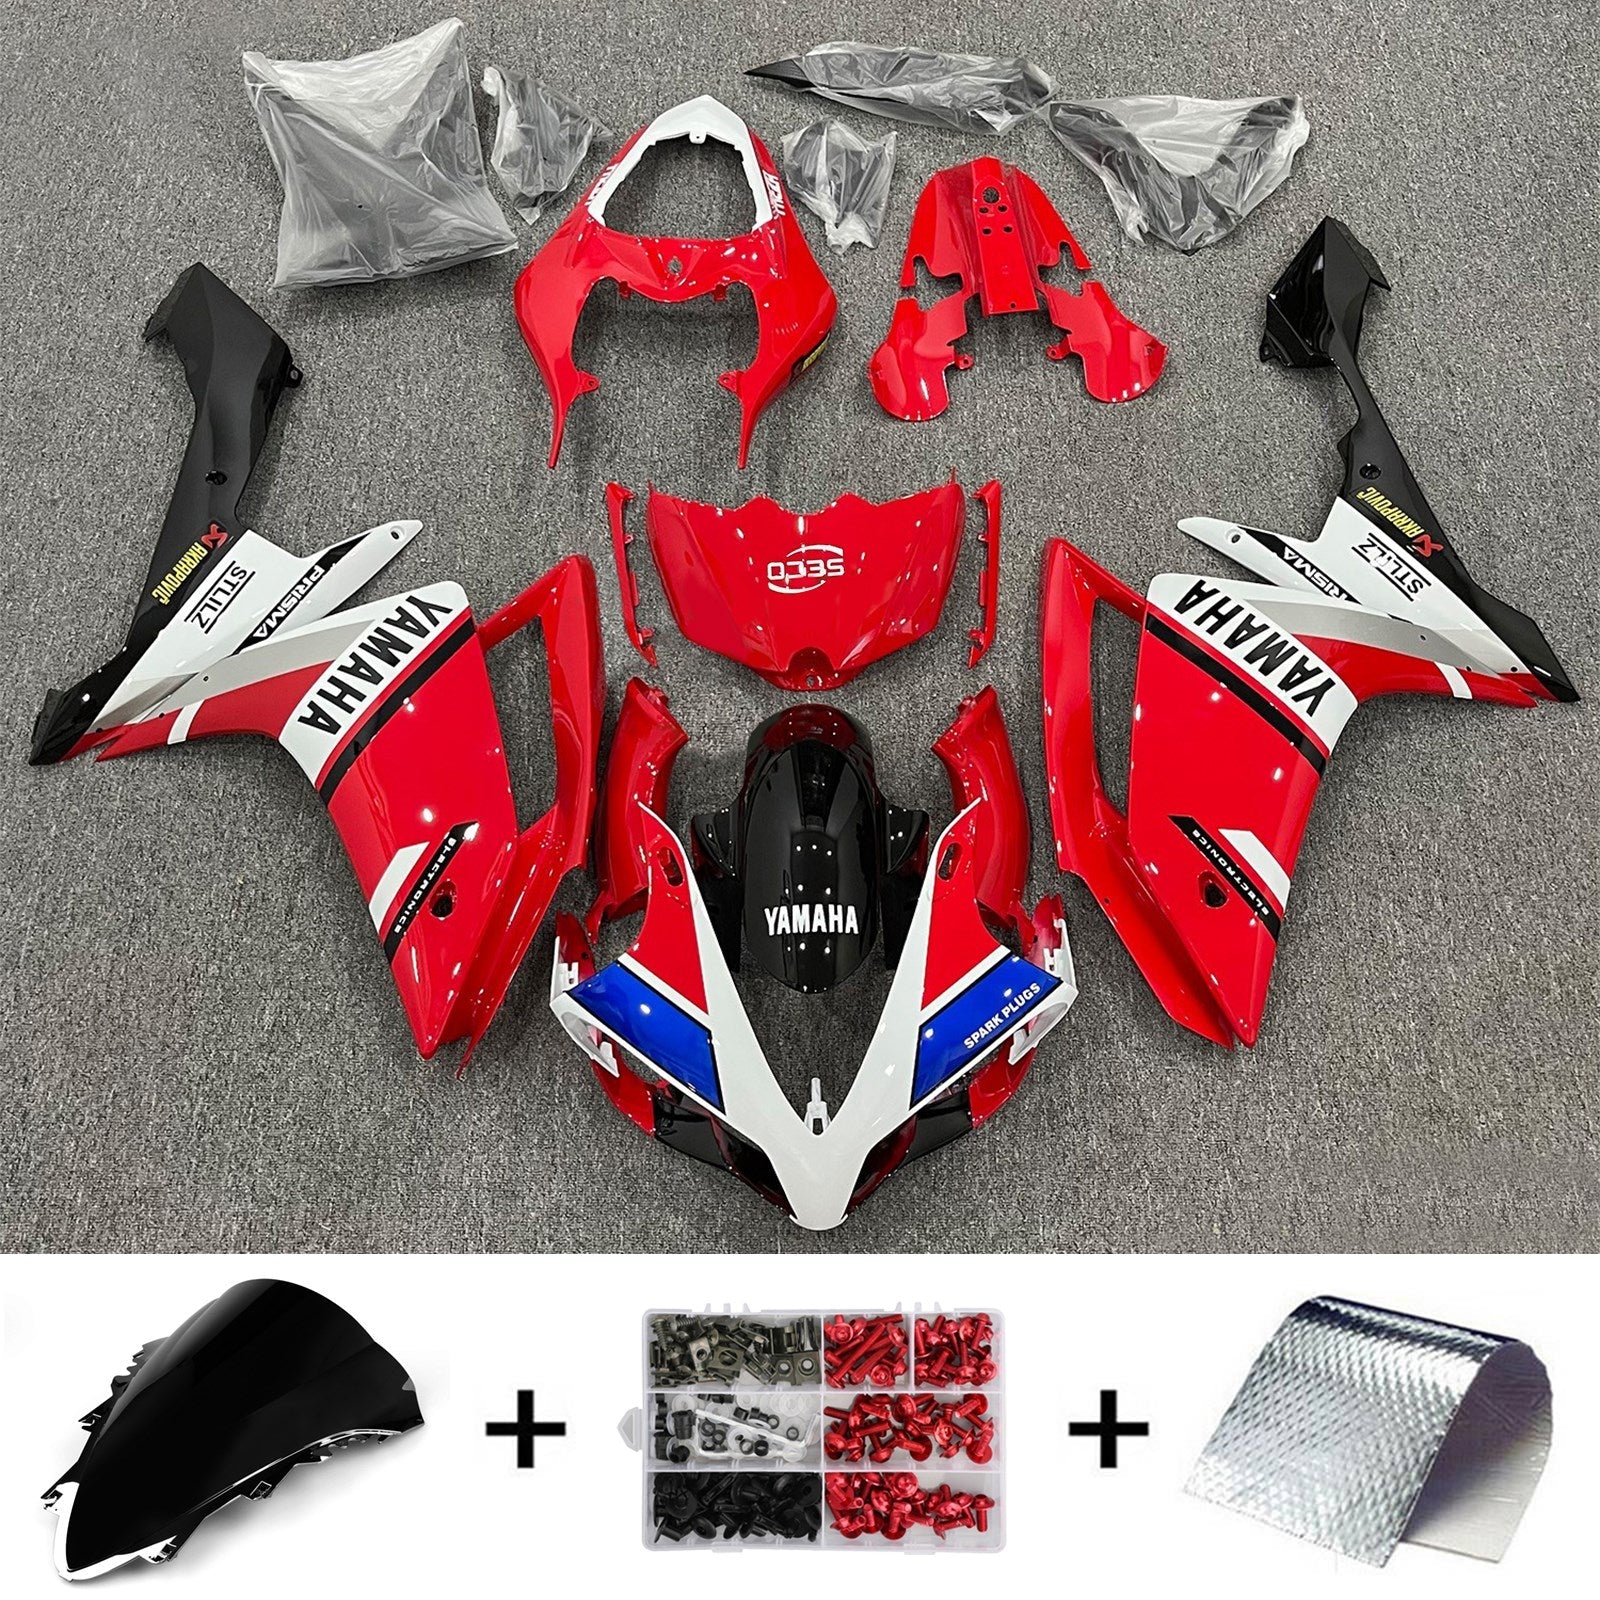 Kit Carena Amotopart Yamaha YZF 1000 R1 2007-2008 Carrozzeria in Plastica ABS